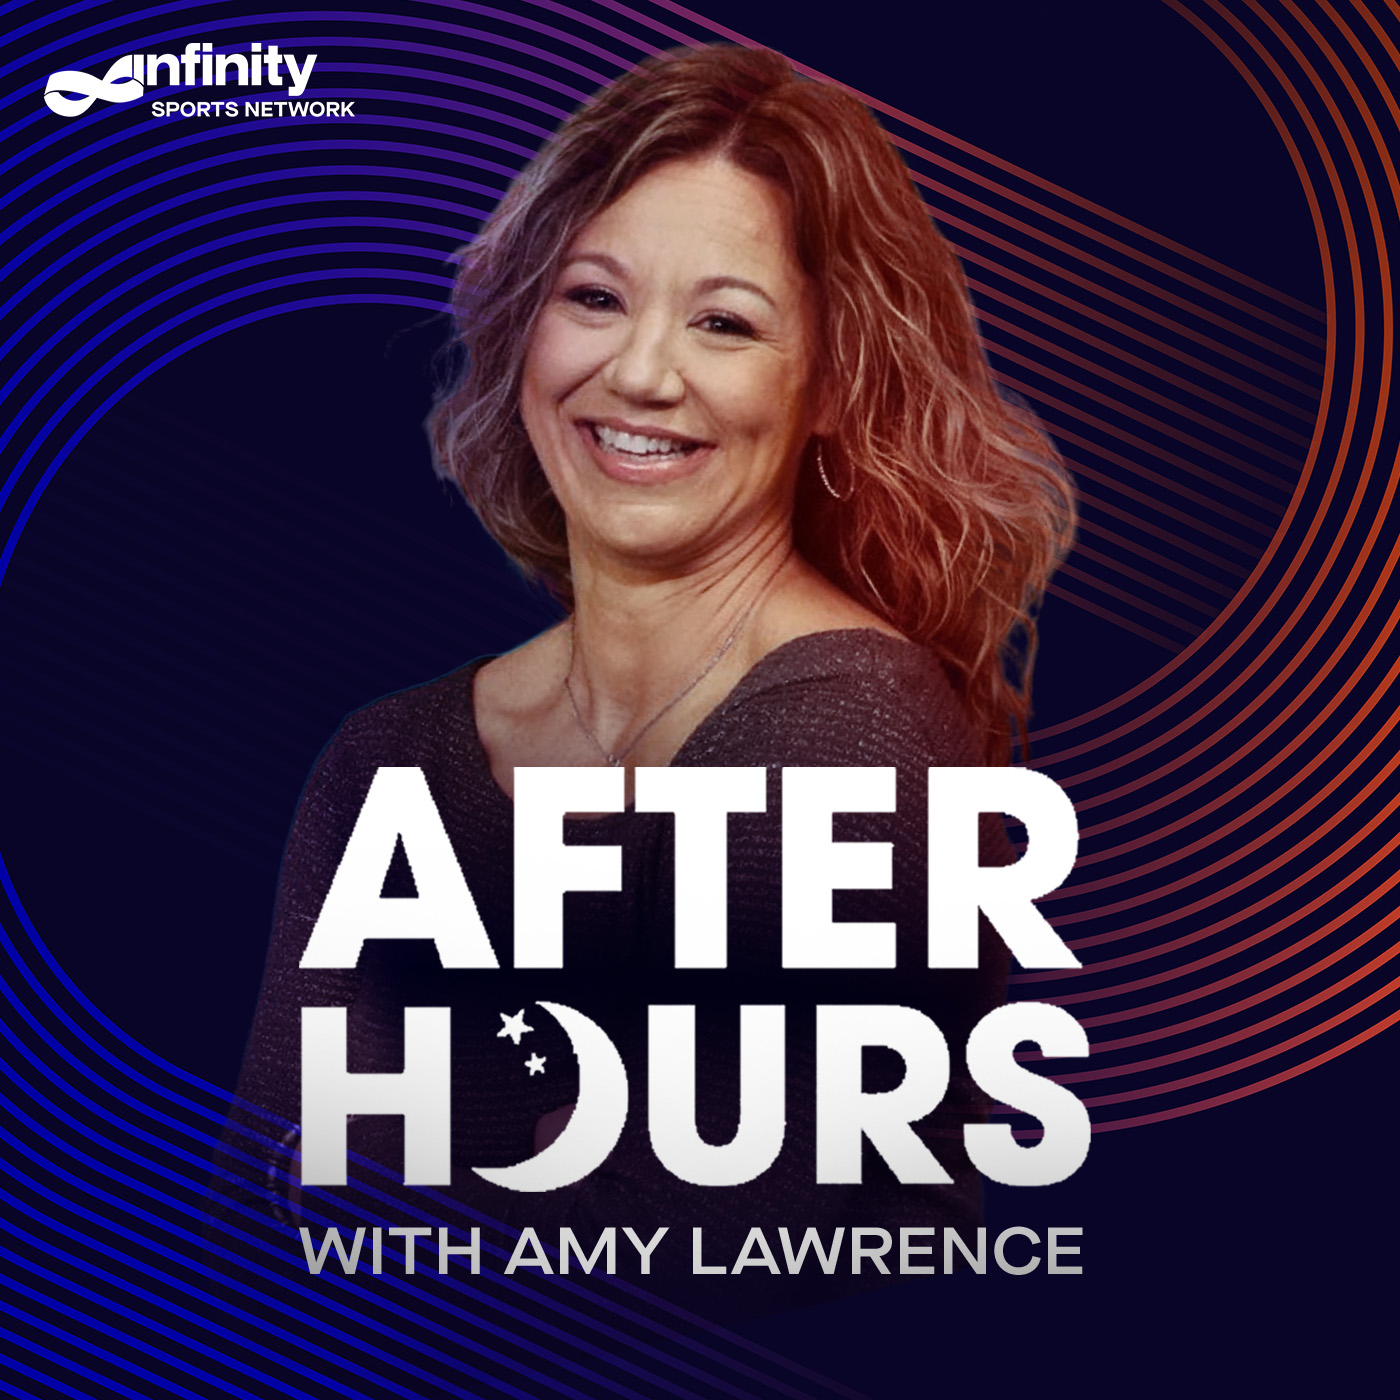 7/5/21 After Hours with Amy Lawrence PODCAST: Hour 1